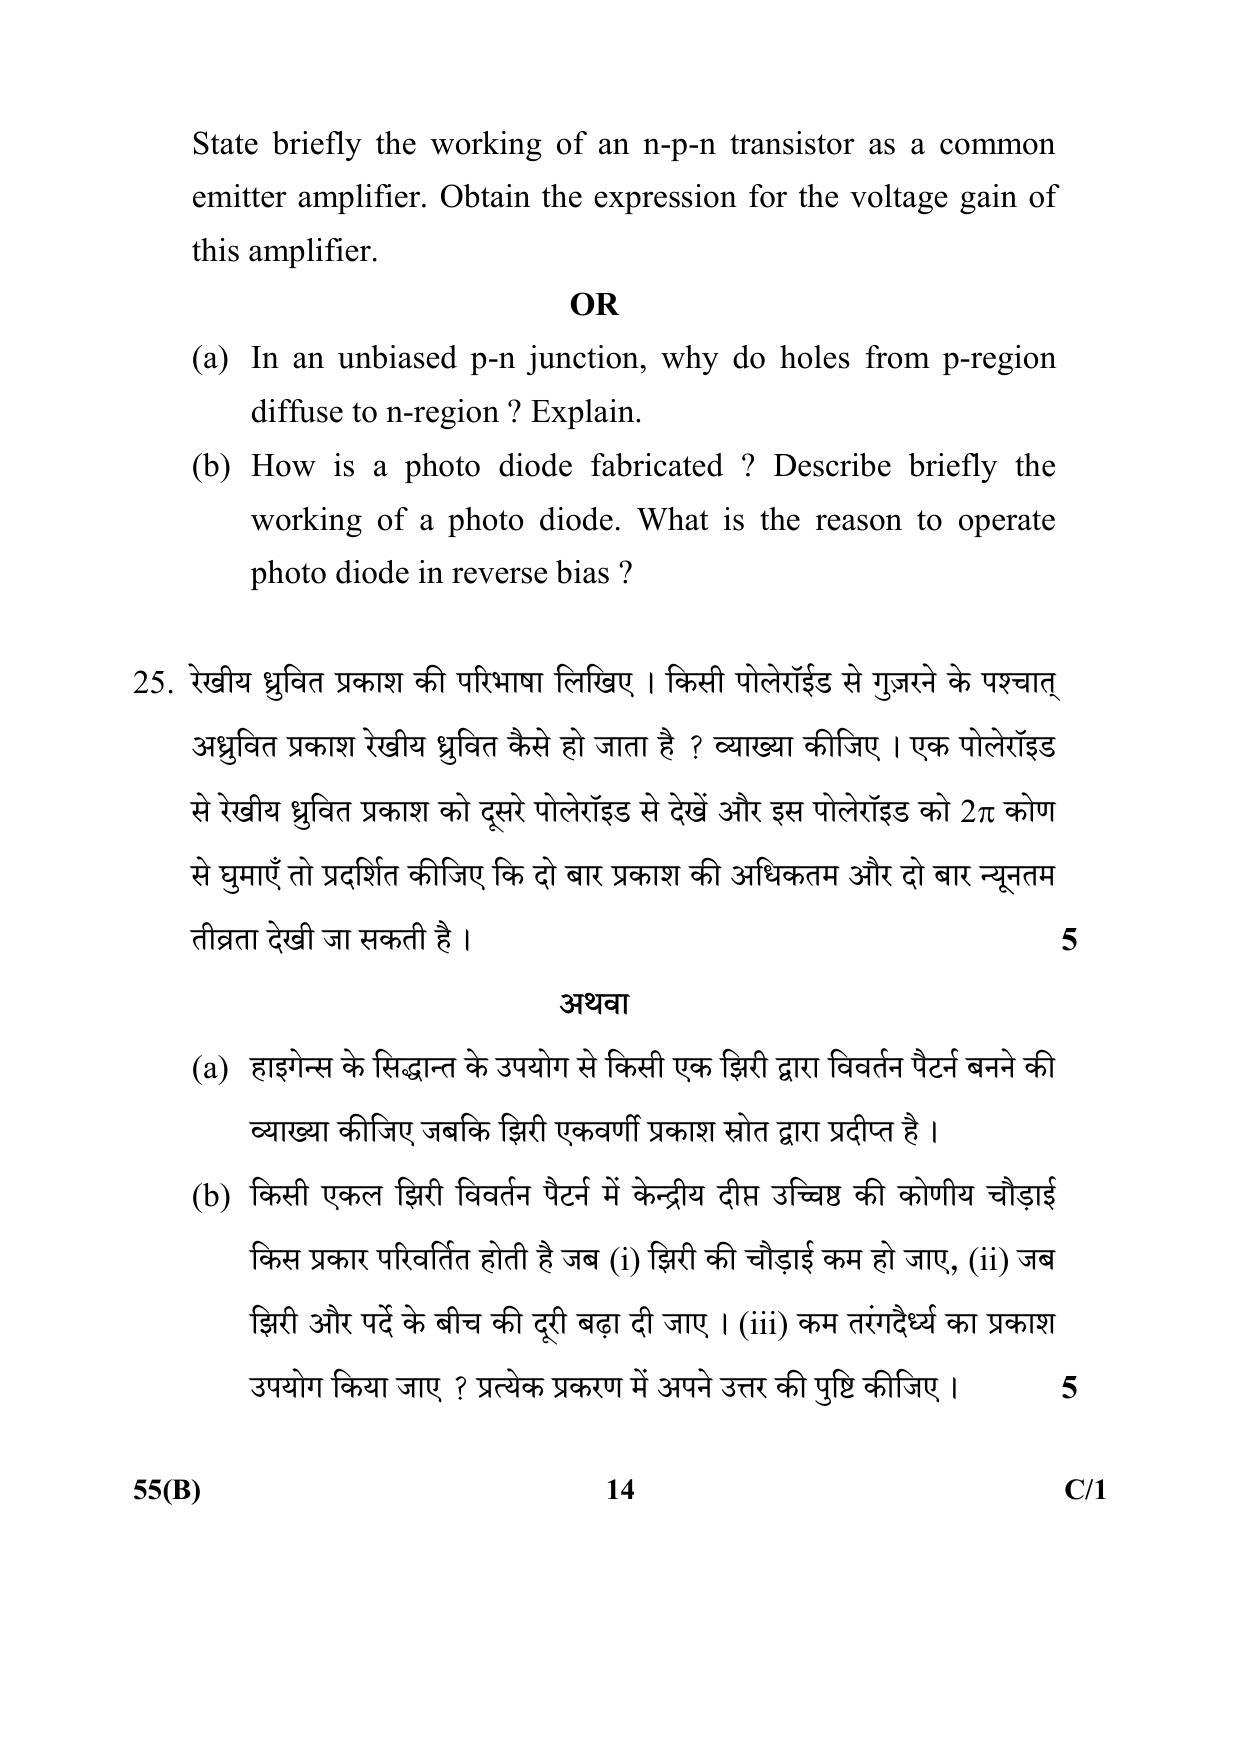 CBSE Class 12 55(B) (Physics) 2018 Compartment Question Paper - Page 14